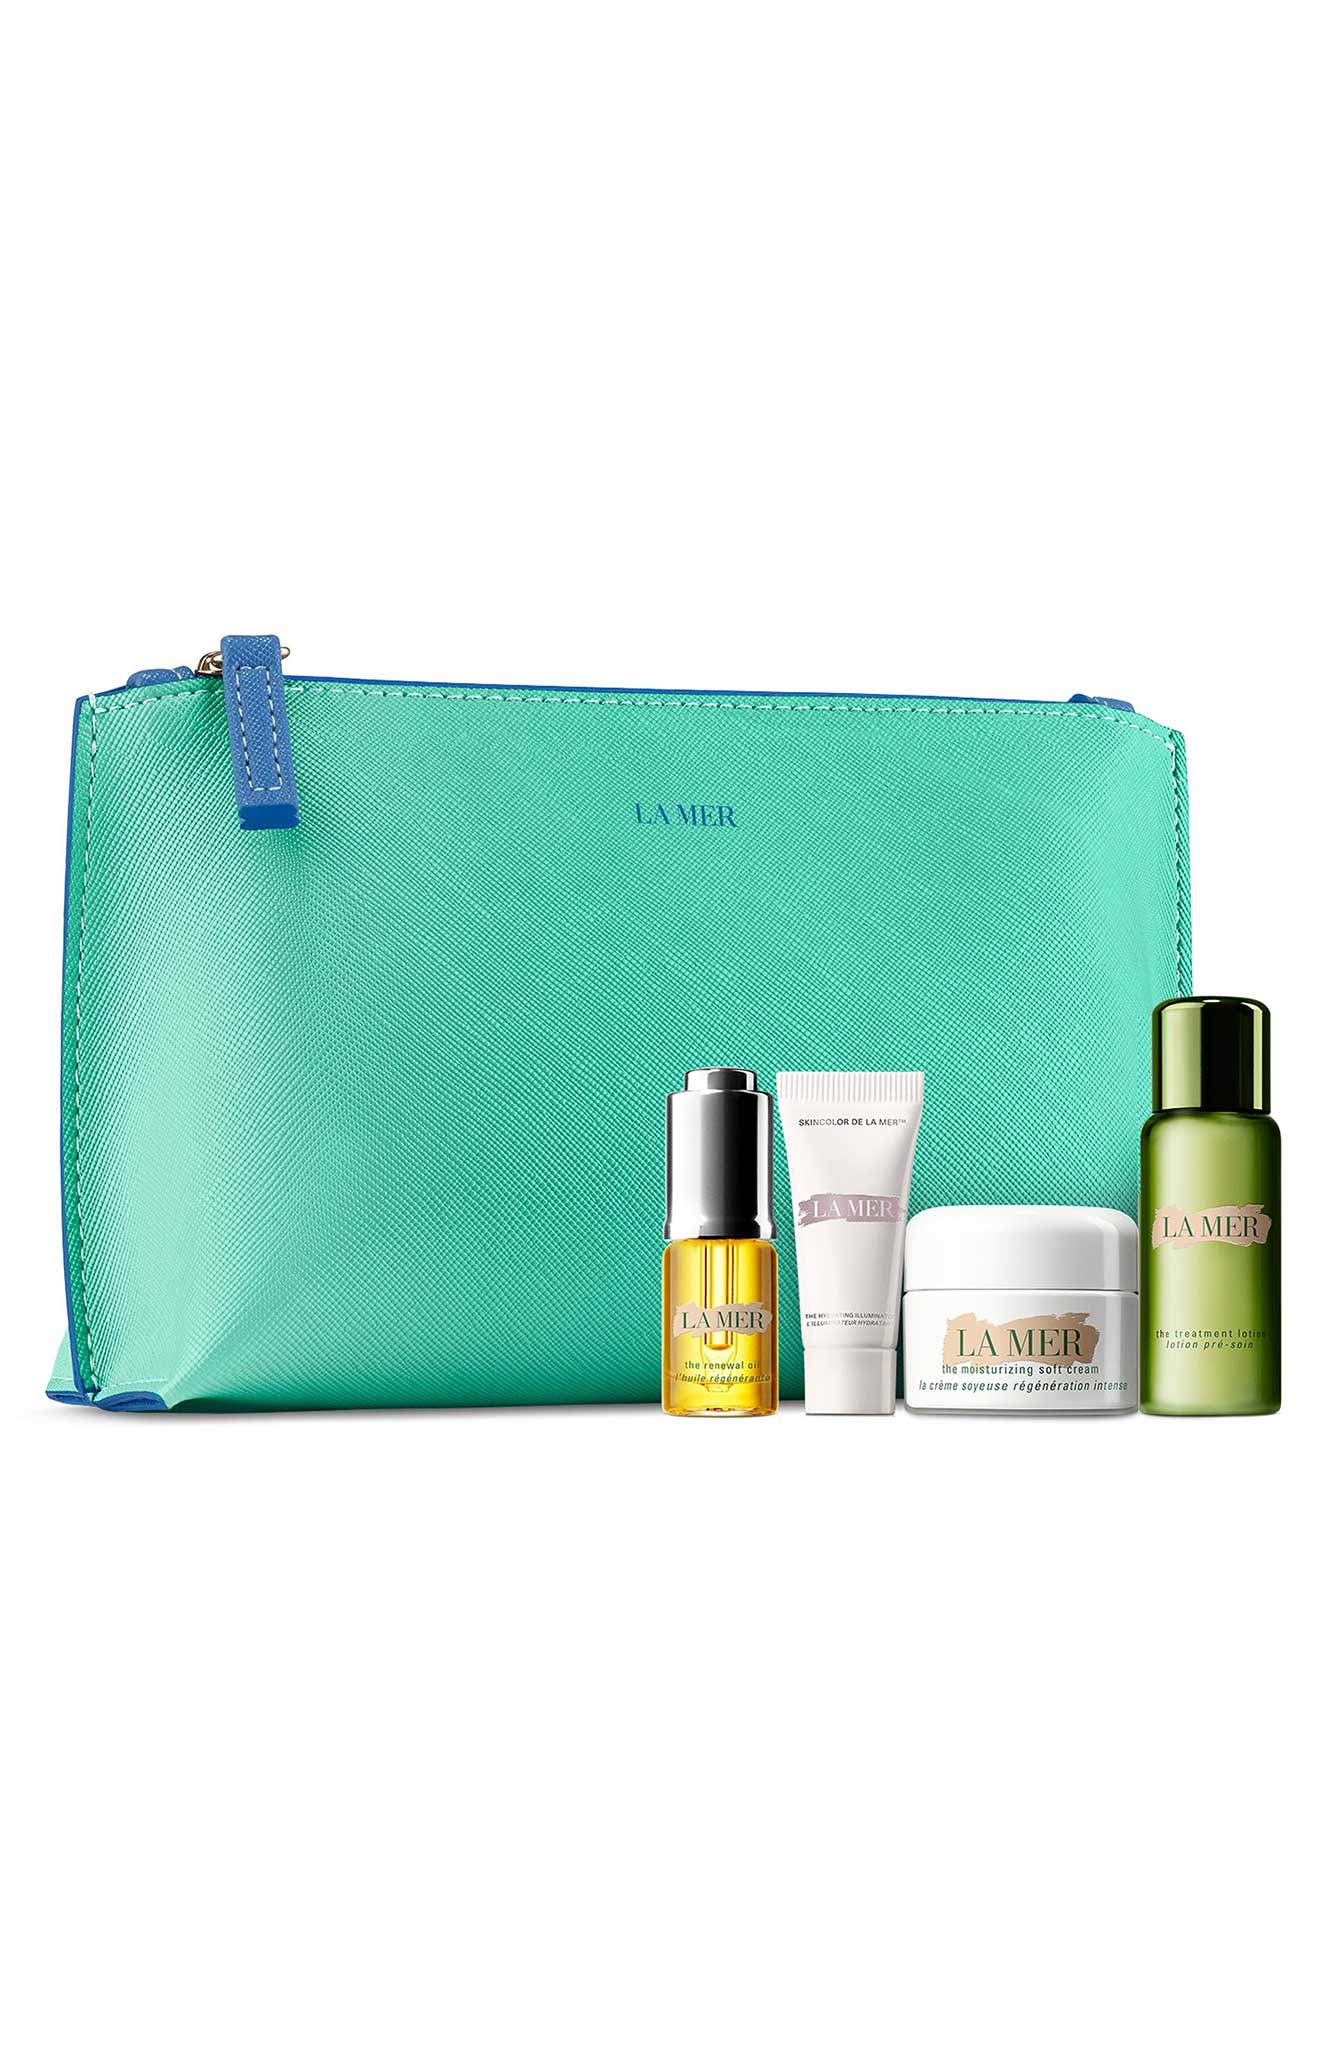 La Mer Mini Miracles Set: This set is perfect for La Mer fans and those who want to discover the signature La Mer glow. The set comes with the Treatment Lotion, Renewal Oil, Hydrating Illuminator and your choice of Original or Soft Crème. It’s the best of La Mer for under $100.